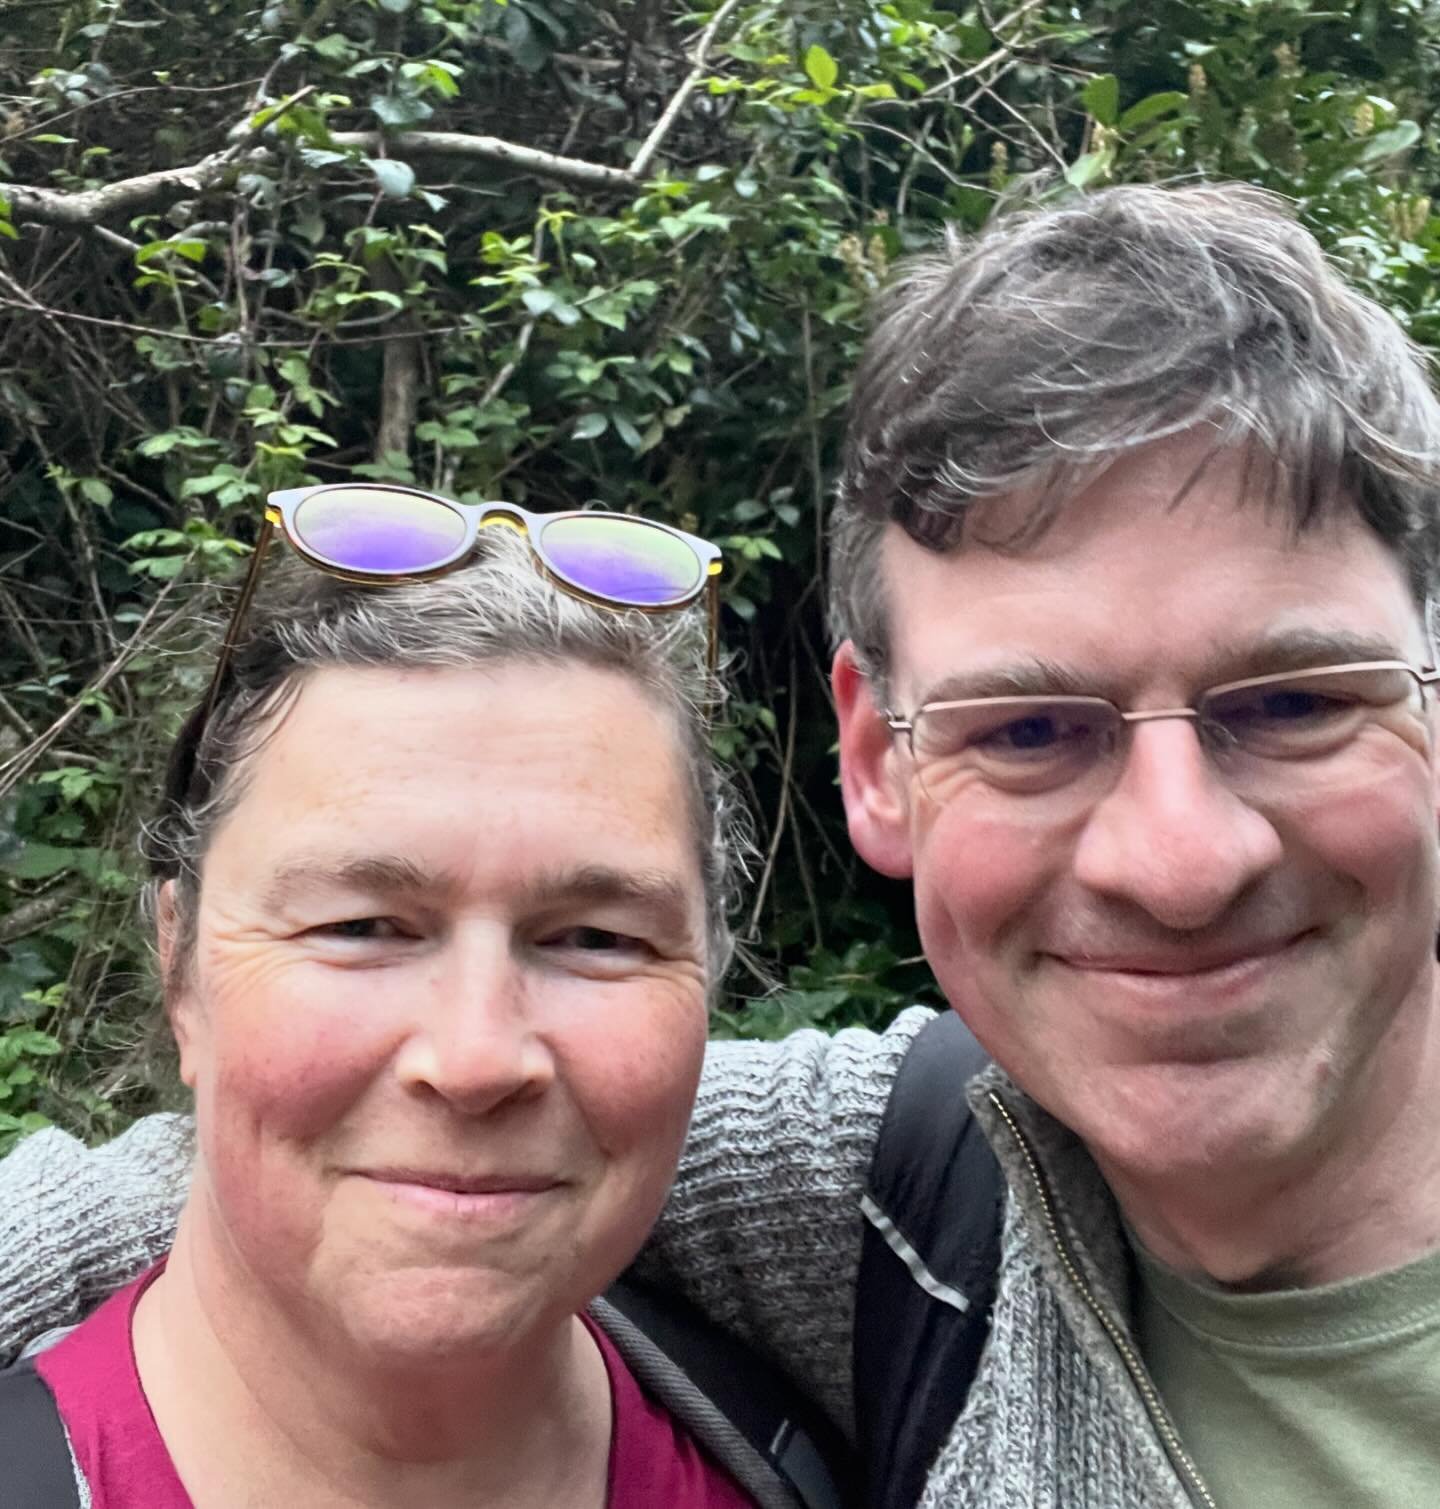 We made it! After 11 hours of walking 55,000 steps and 25 miles, we arrived back at our starting point in Westcott. Huge thanks to the generous folks who have supported us.